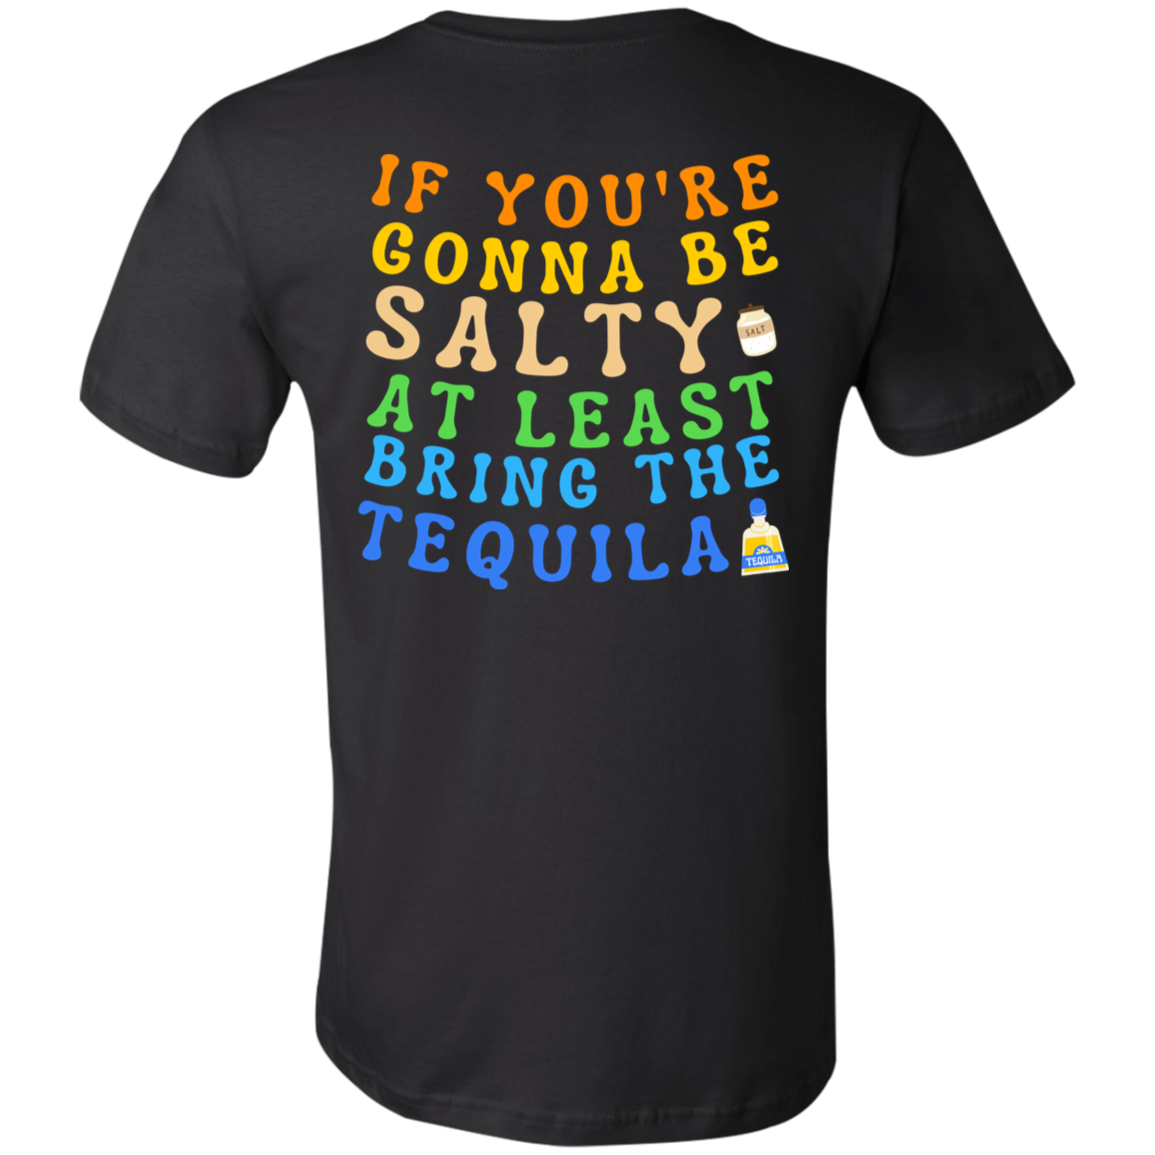 If You're Gonna Be Salty at Least Bring The Tequila Shirt